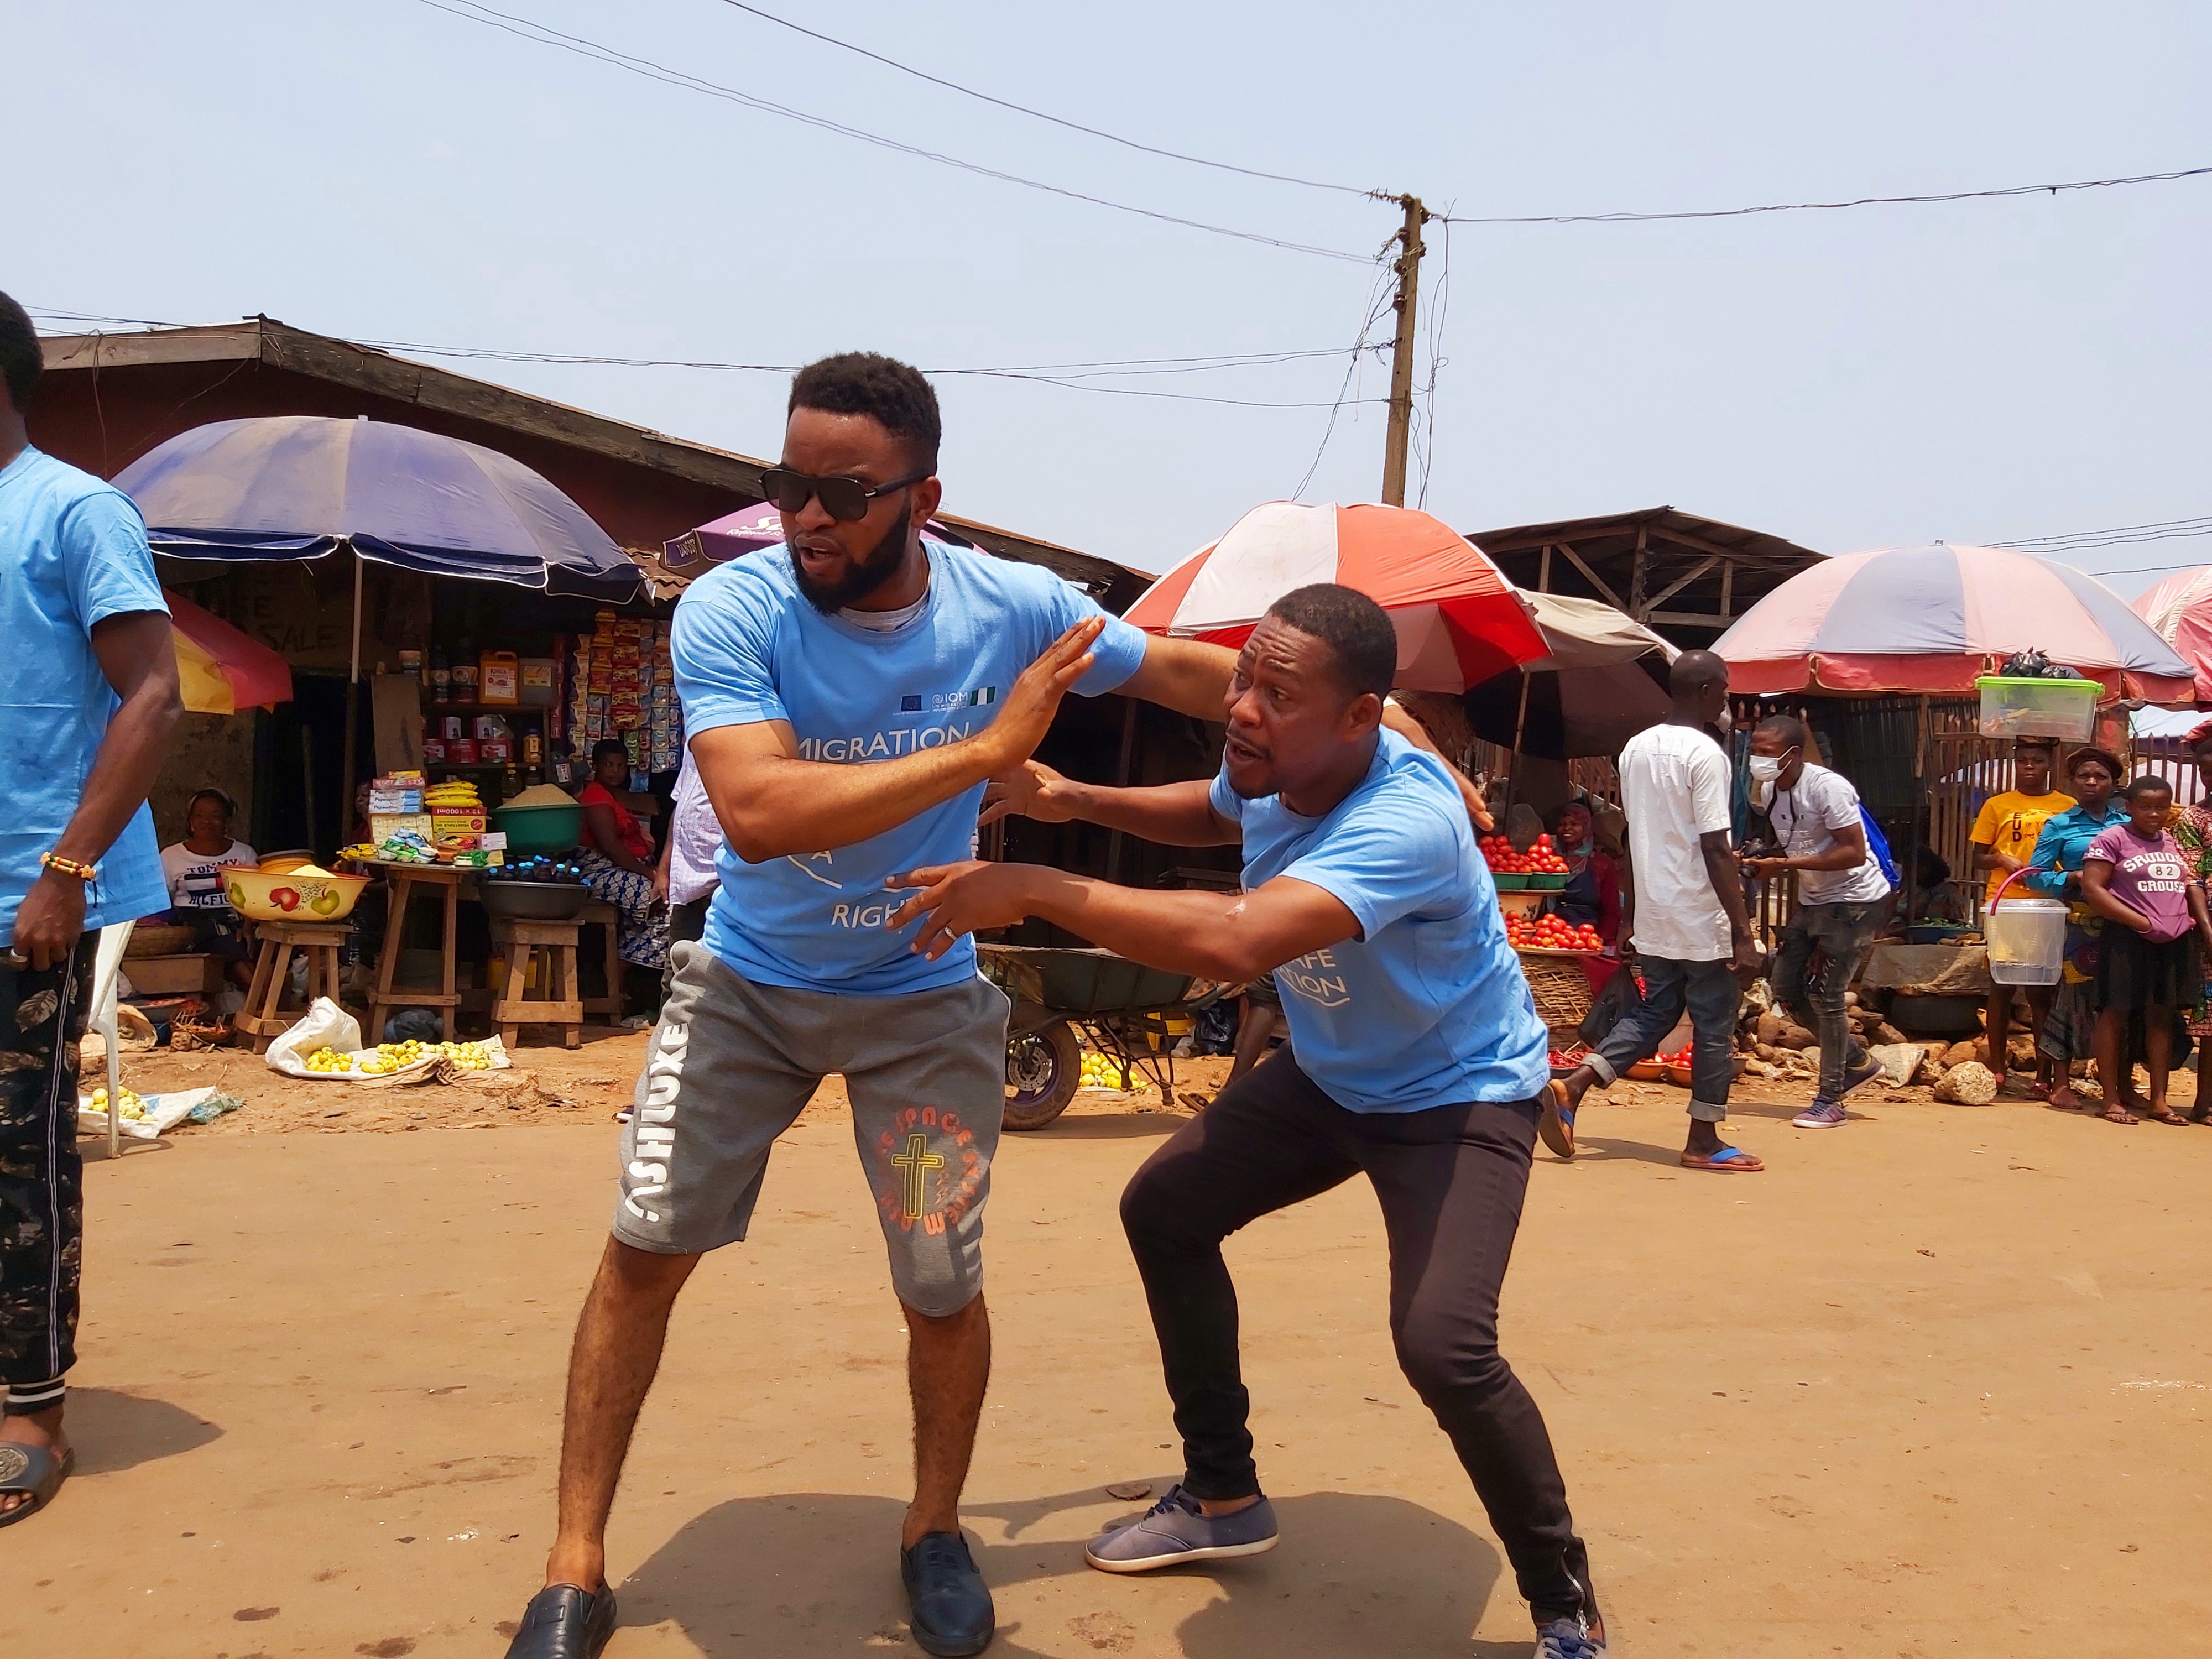 Clement acting during the community theatre play, ‘Dance of a migrant’ at a market in Benin city. © IOM 2021/Elijah Elaigwu